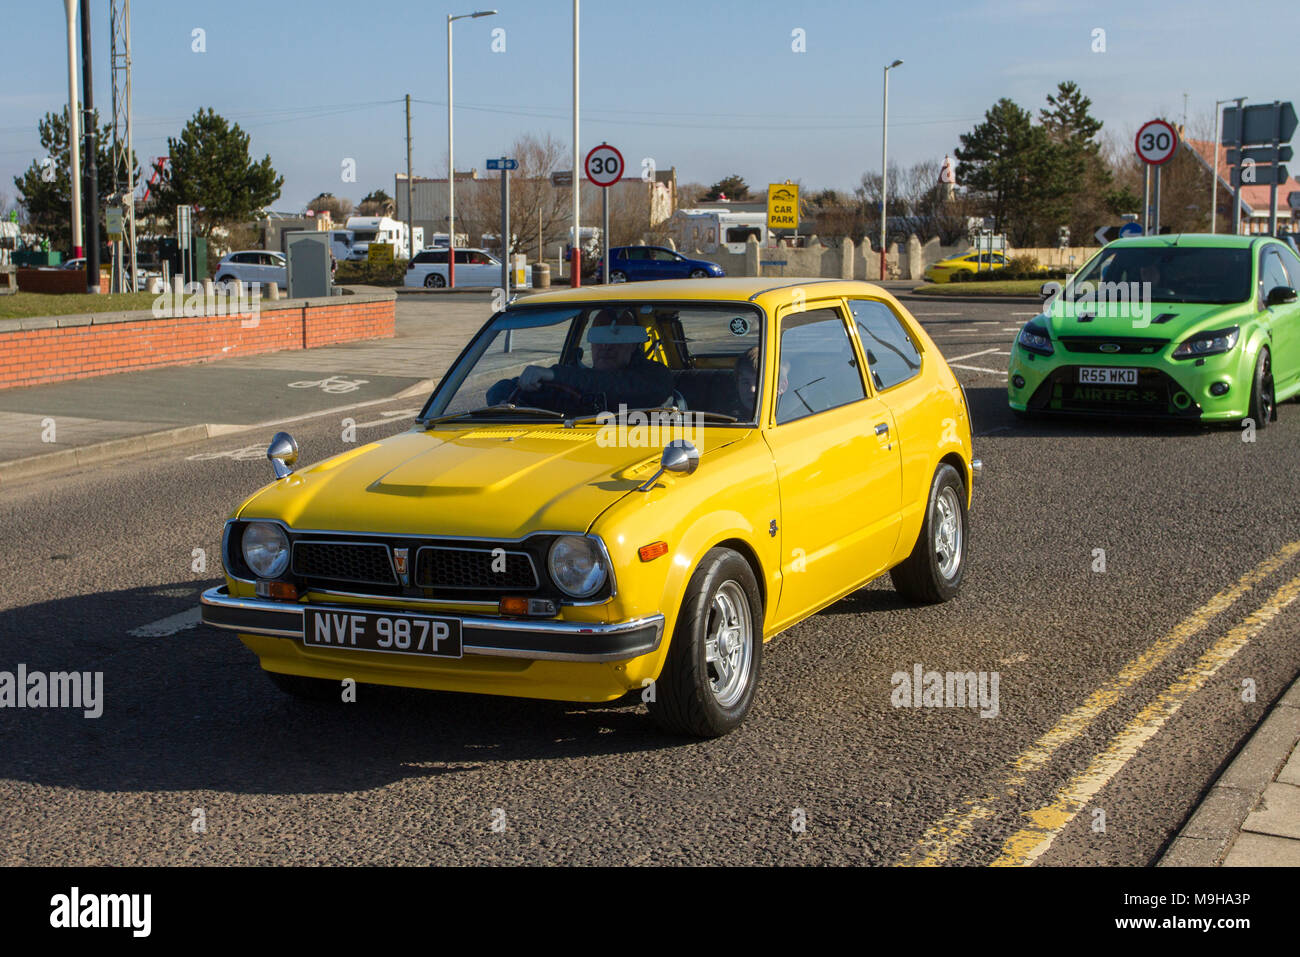 1976 70s yellow Honda Civic 3 Al Auto 1169cc petrol;  North-West Supercar event as cars arrive in the coastal resort of Southport. Classic cars & 70s vintage car enthusiasts enjoy a motoring day out. Stock Photo